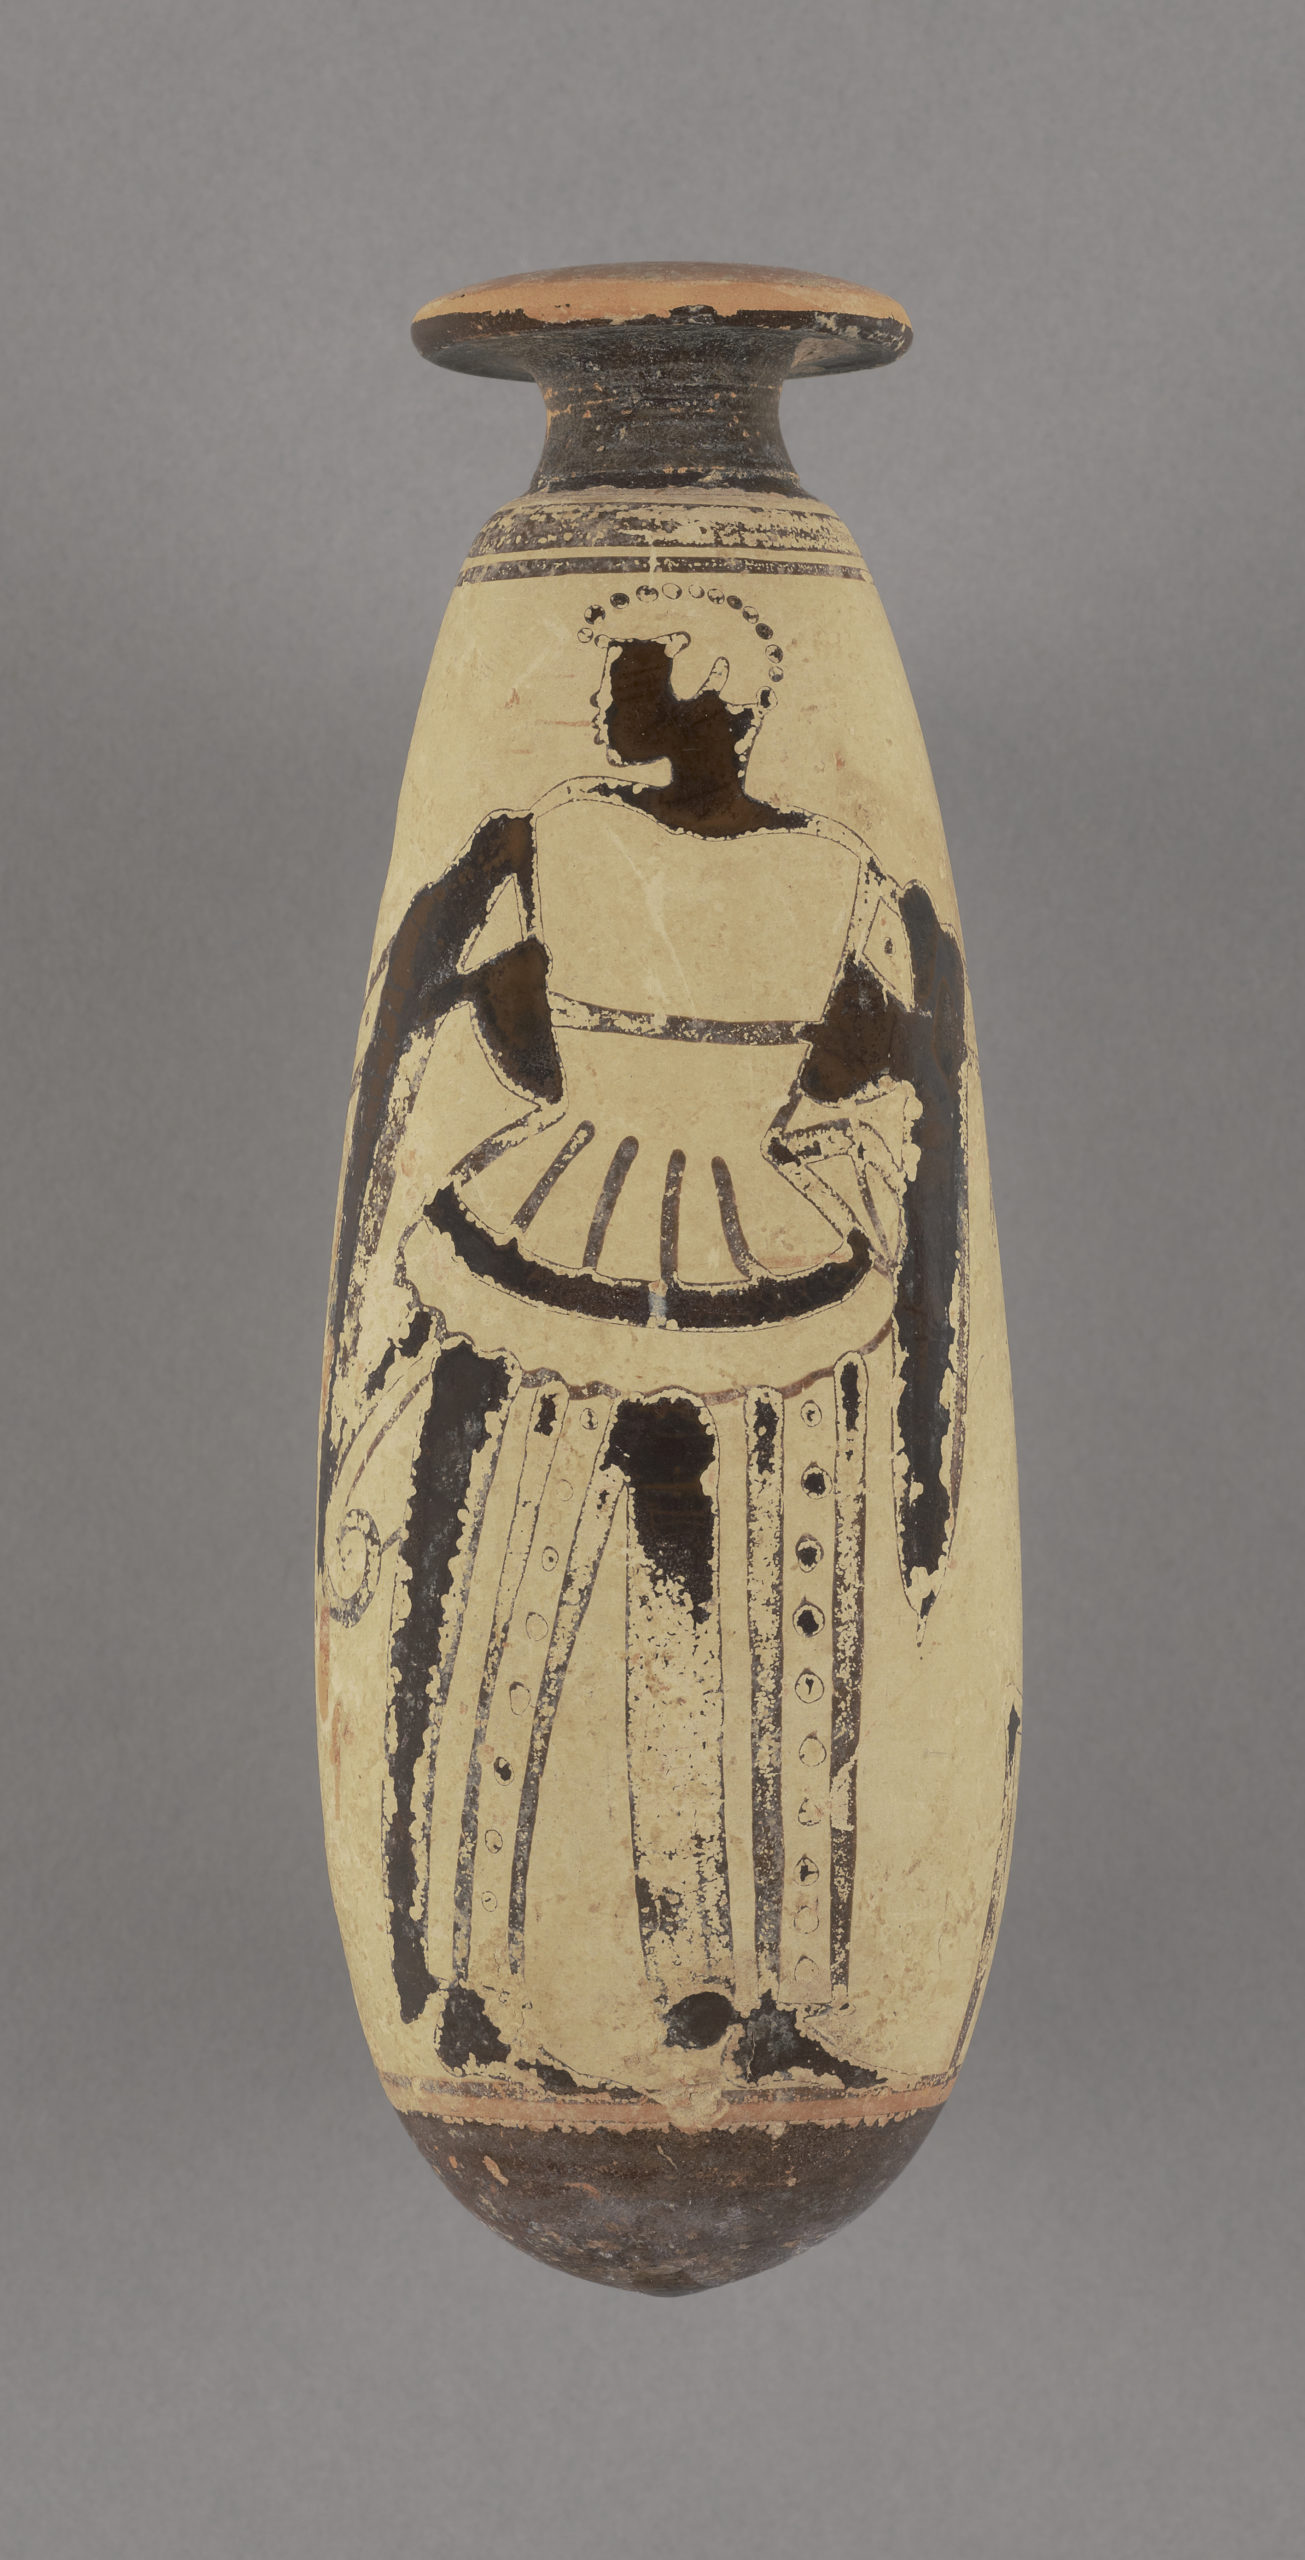 Attic White-ground Alabastron, about 480 B.C., Greek. Terracotta, 5 11/16 inches high. (The J. Paul Getty Museum, 71.AE.202. Digital image courtesy of the Getty’s Open Content Program)